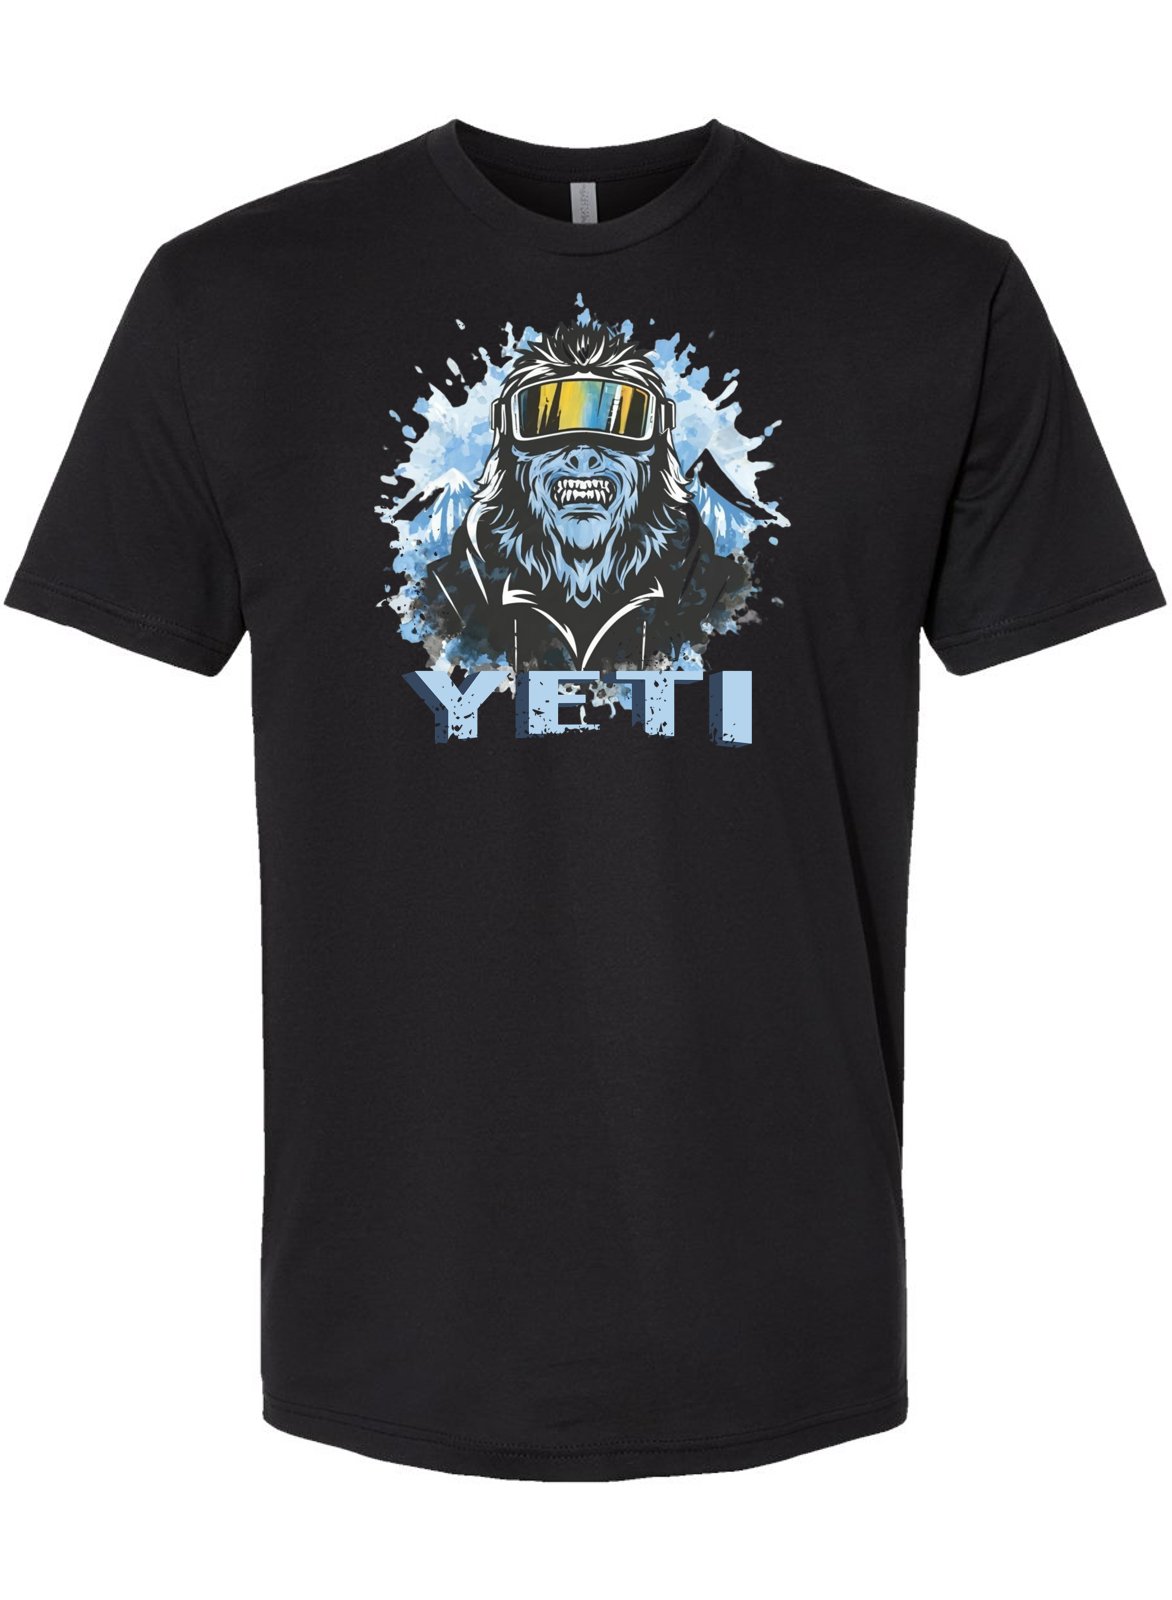 Shred in Style with Snowboarding Yeti Tee | Winter Sports Gear -